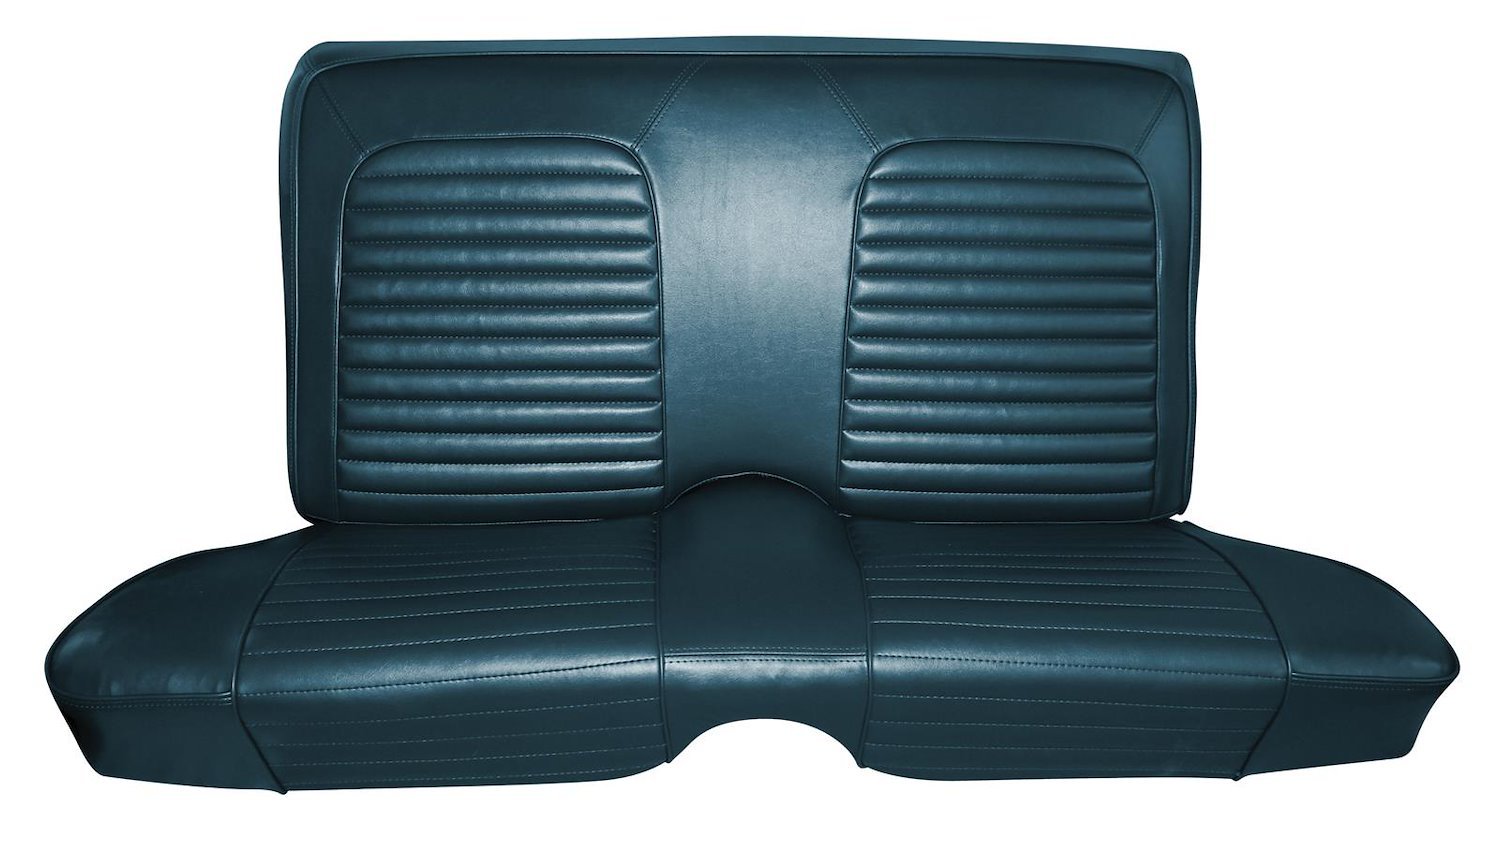 1966 Chevrolet Impala and Super Sport Convertible Two-Tone Interior Rear Bench Seat Upholstery Set